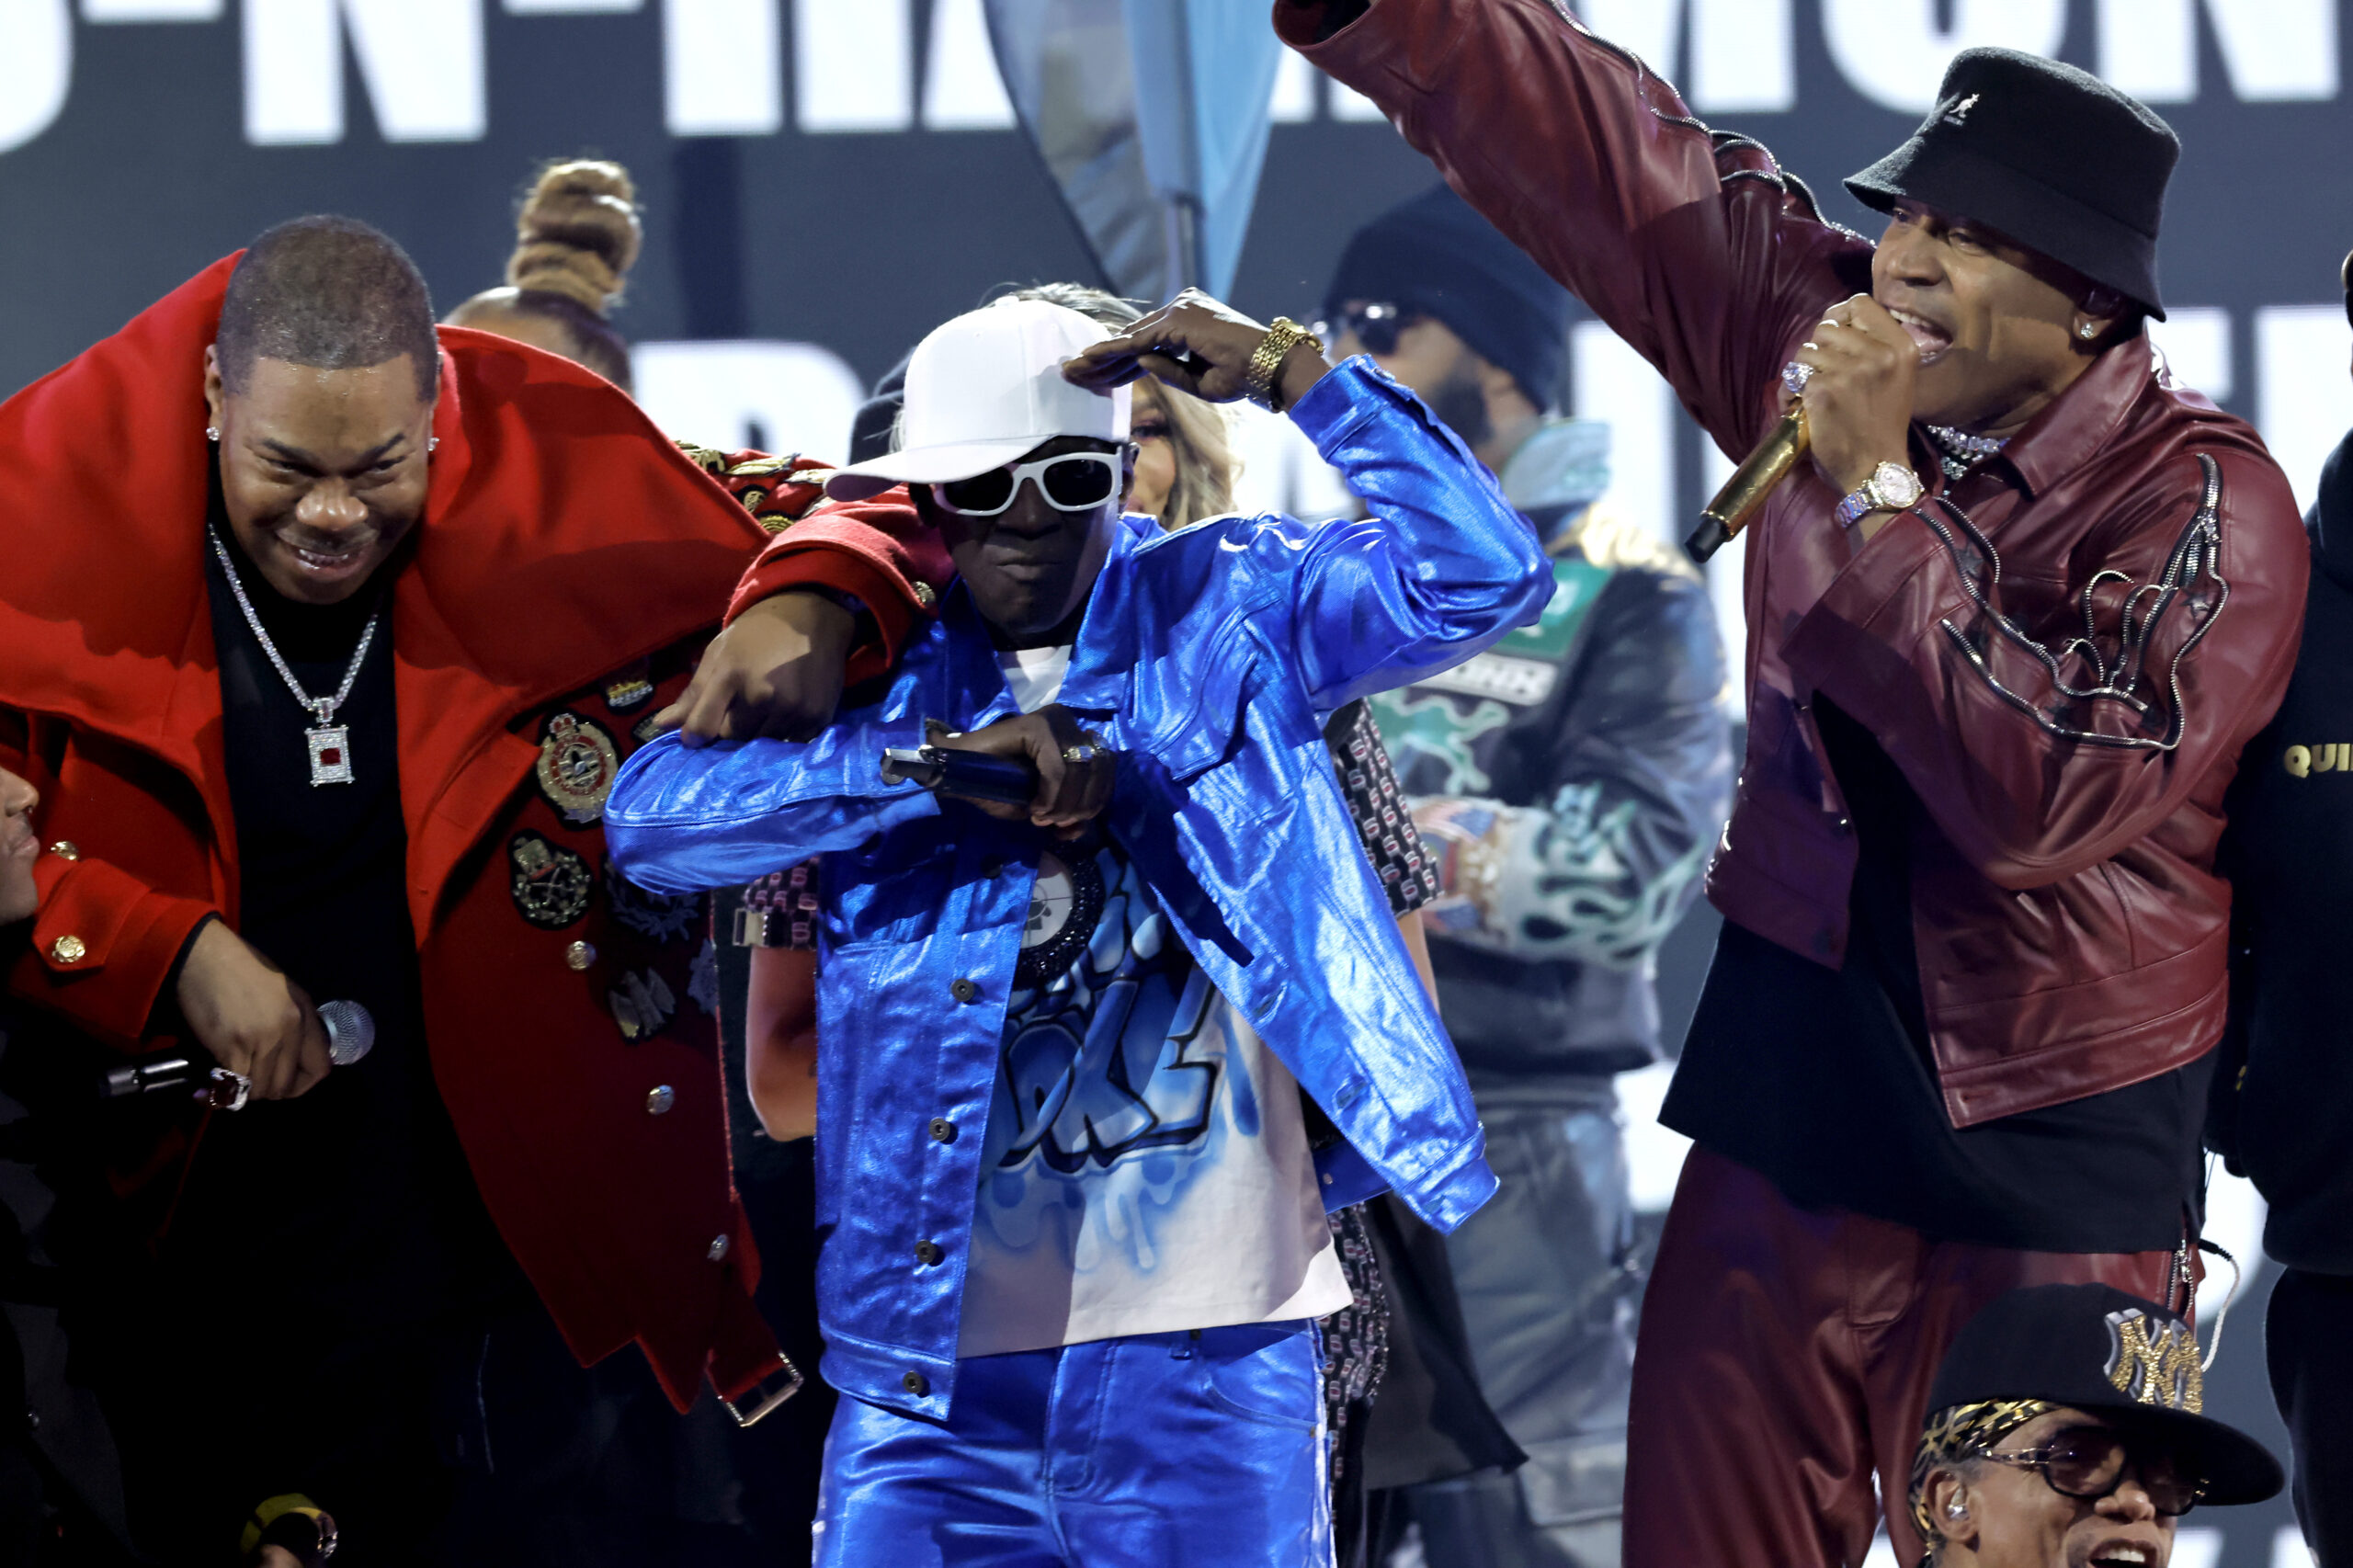 Busta Rhymes, Flavor Flav, and LL Cool J perform at the 2023 Grammys (photo: Kevin Winter / Getty Images for The Recording Academy)